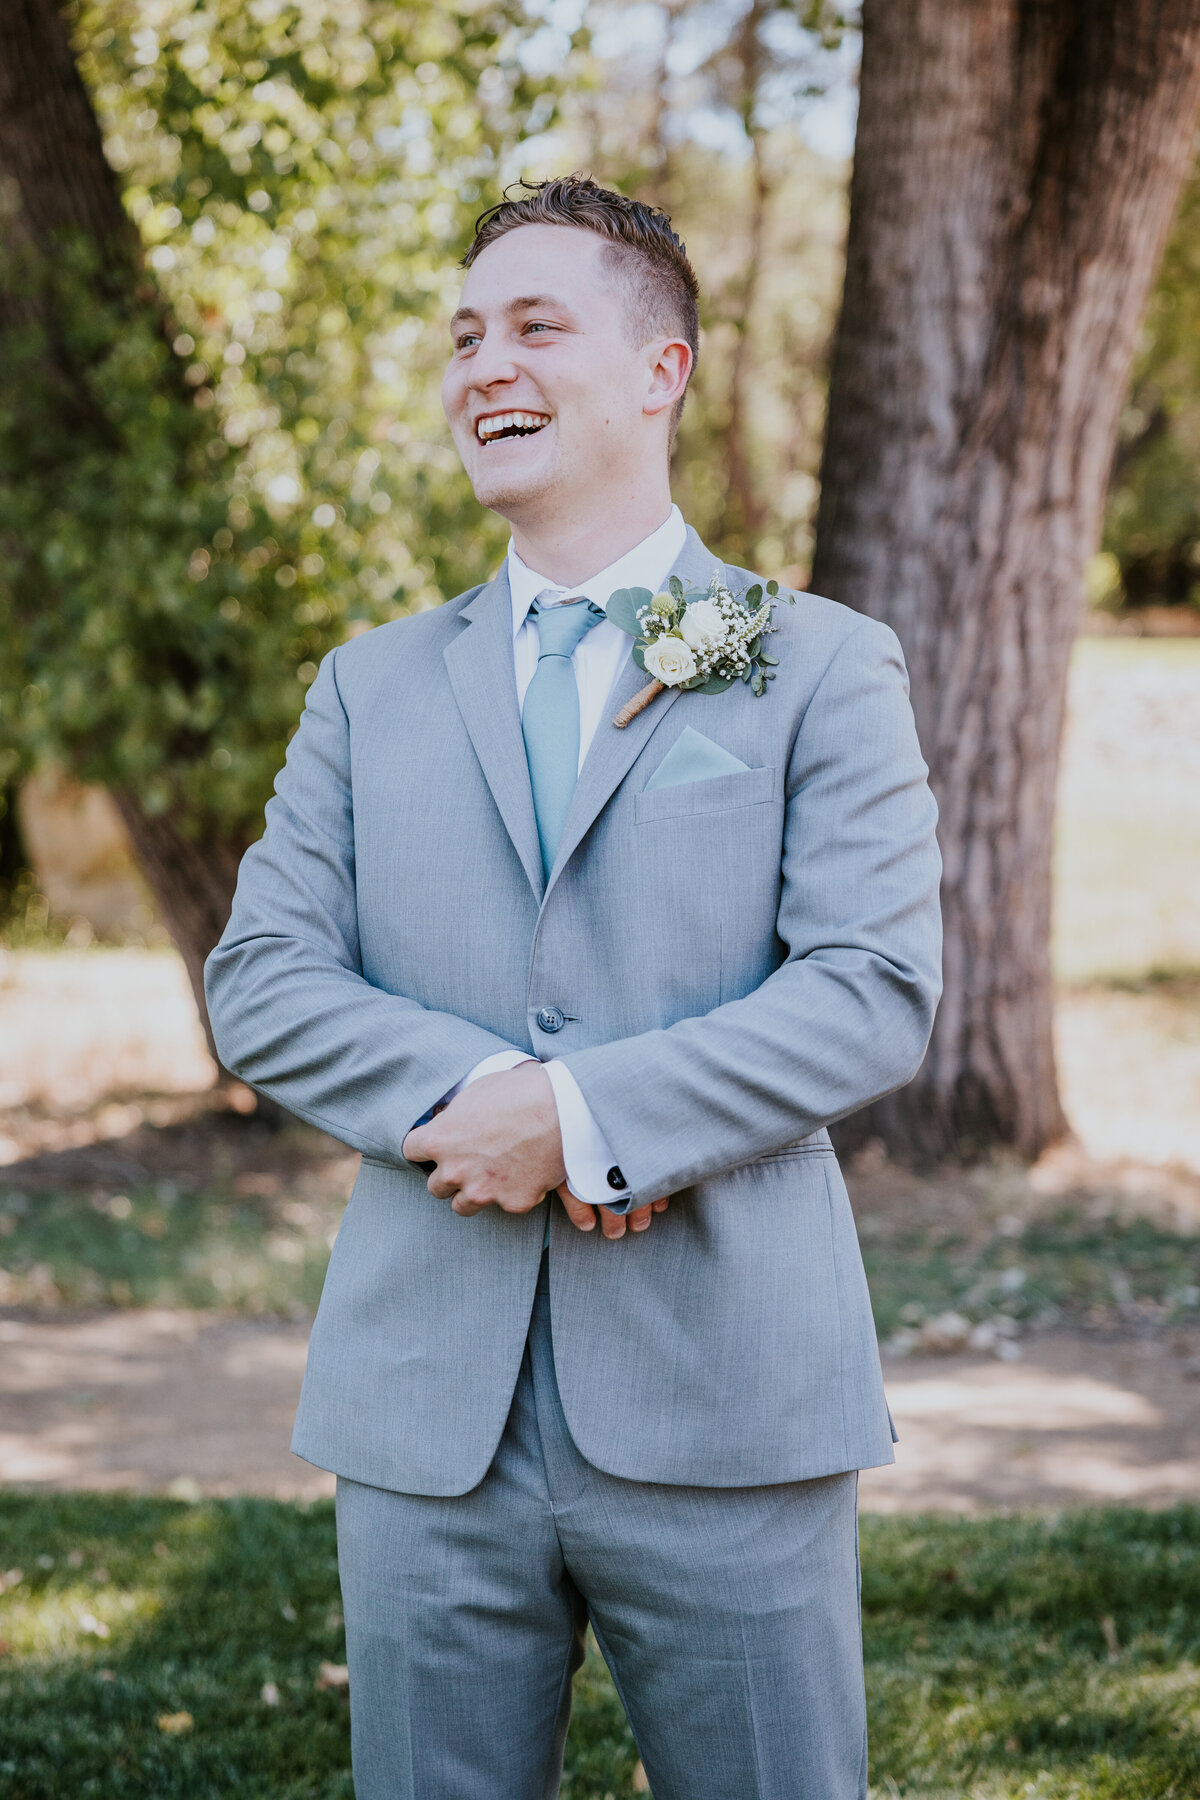 Groom adjusts sleeve while laughing at something just past the camera.